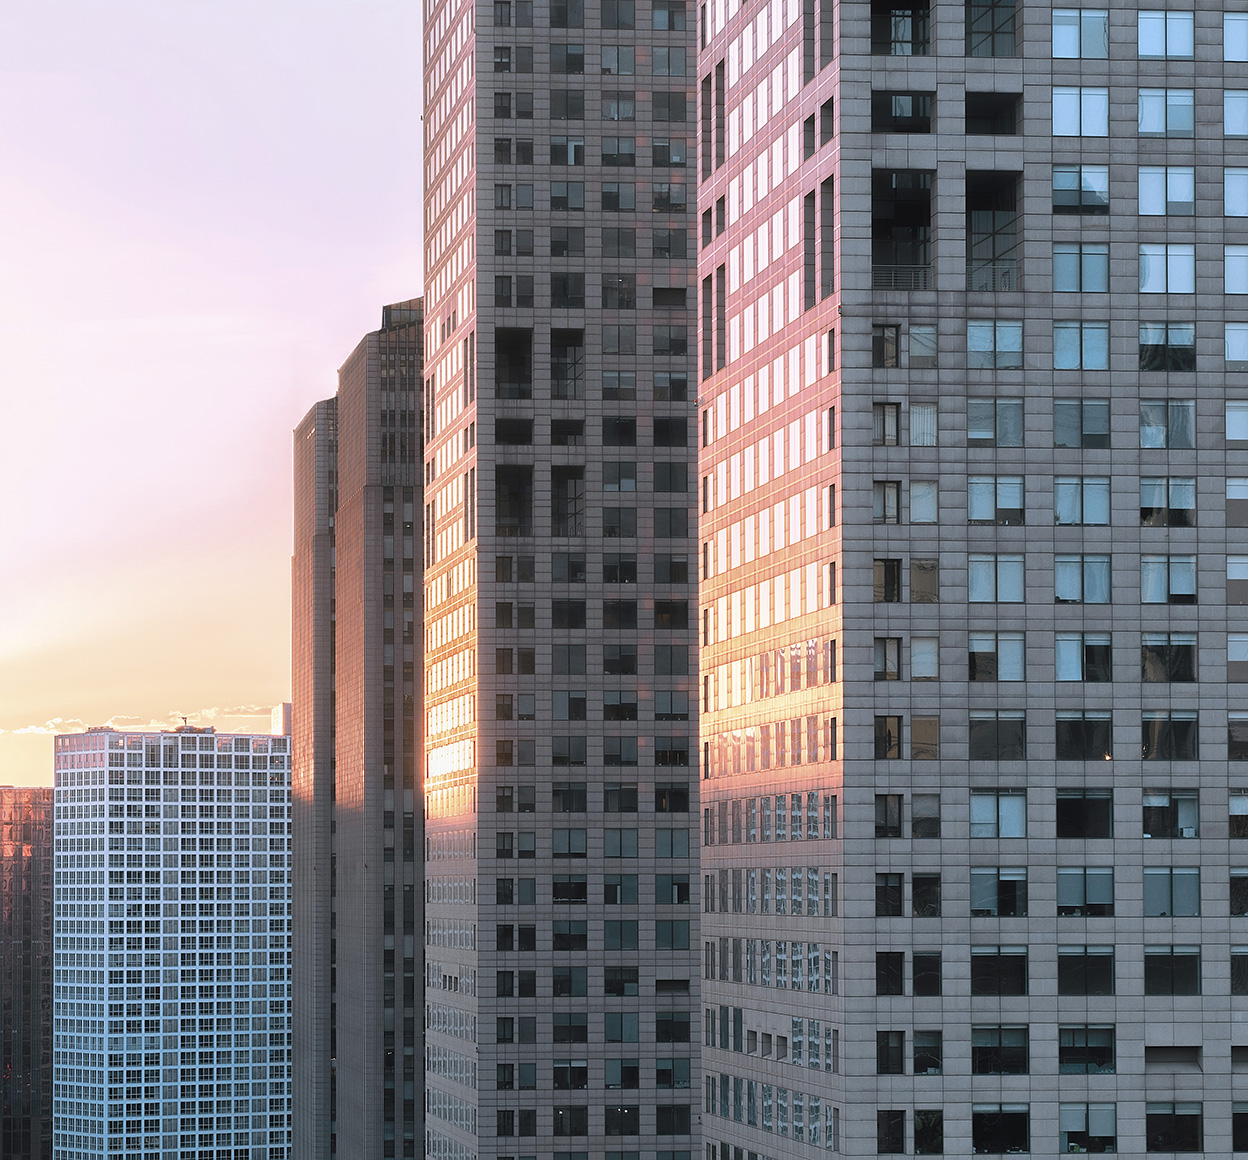 City skyscrapers reflect the light from a sunset